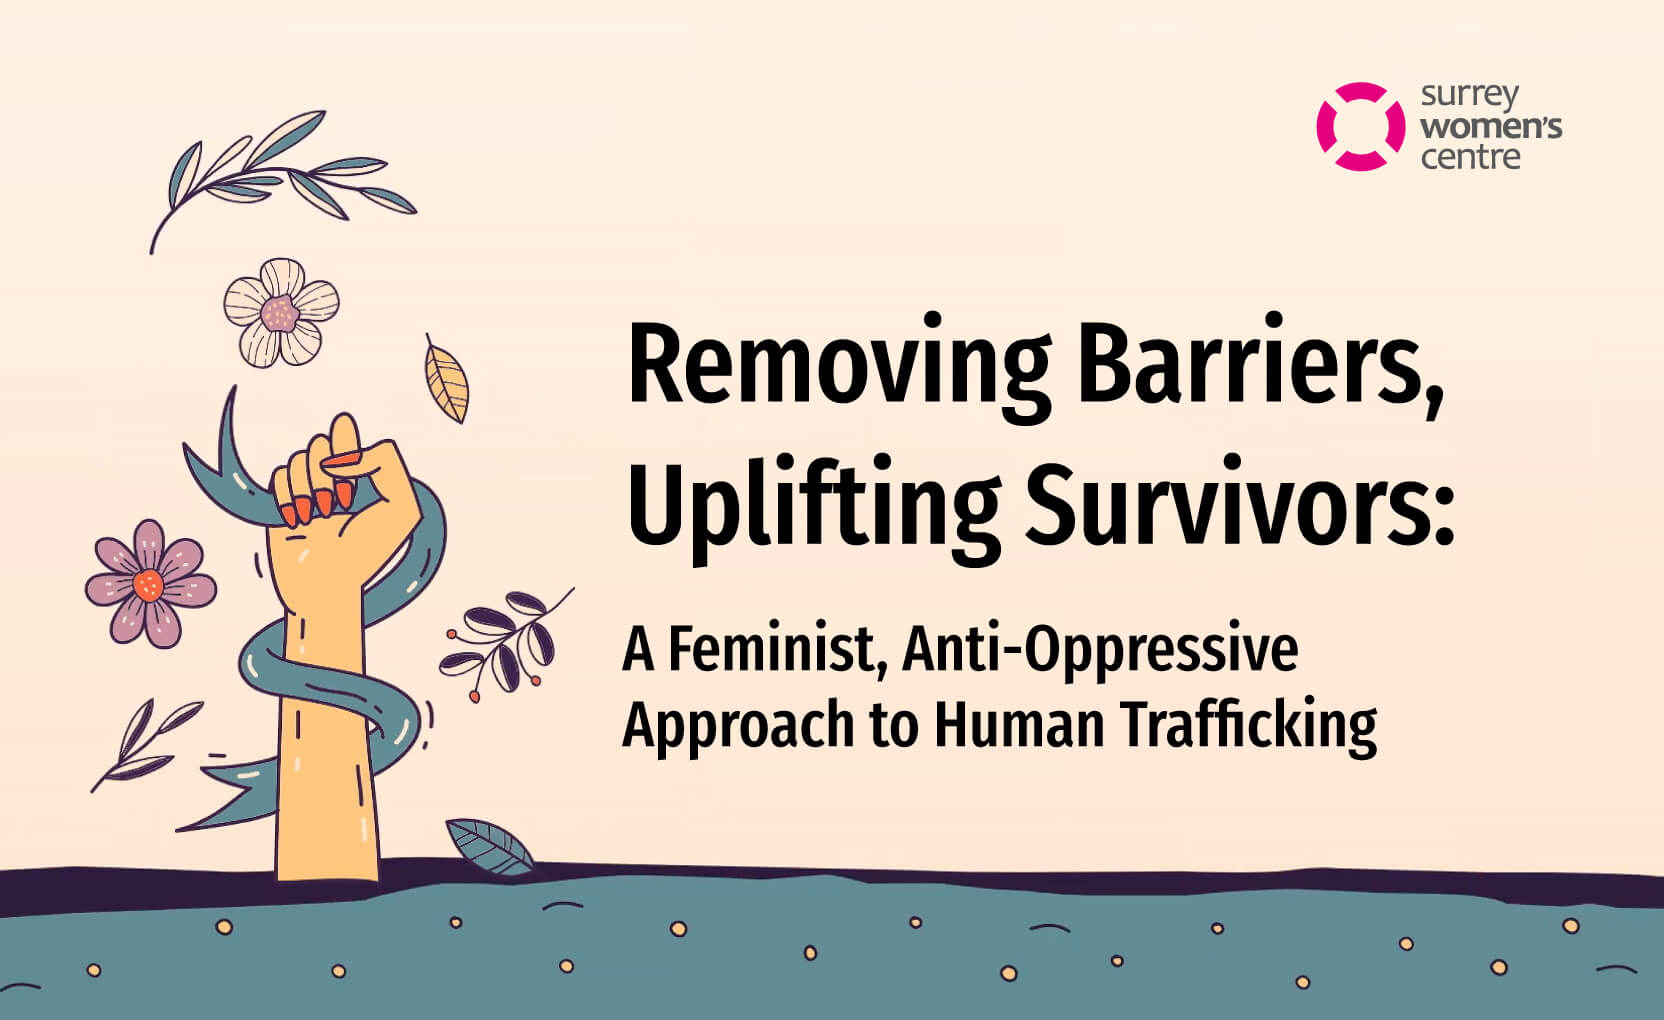 Removing Barriers, Uplifting Survivors: A Feminist, Anti-Oppressive Approach To Human Trafficking